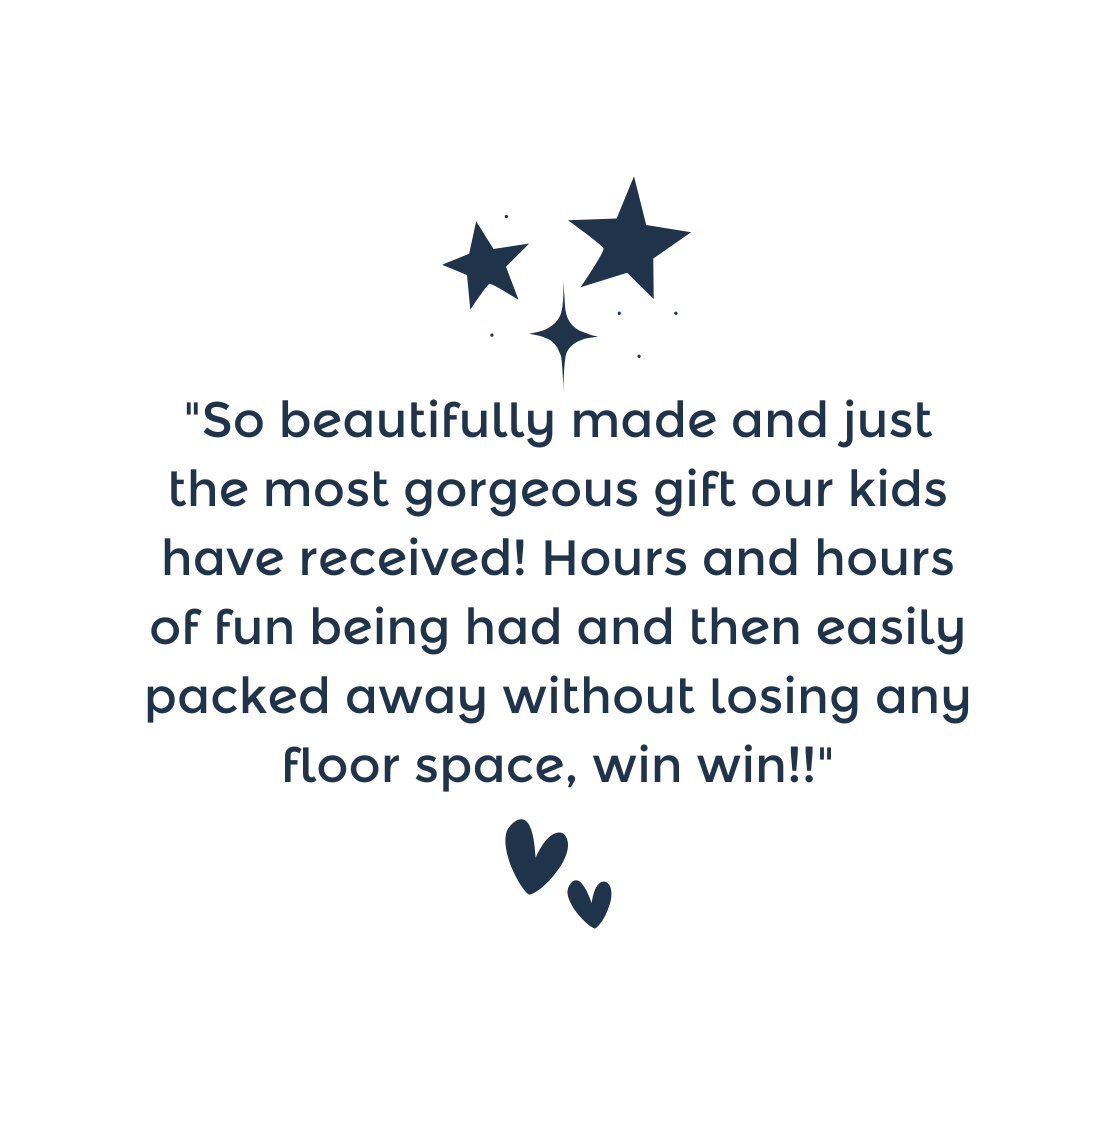 "So beautifully made and just the most gorgeous gift our kids have received! Hours and hours of fun being had and then easily packed away without losing any floor space, win win!!"